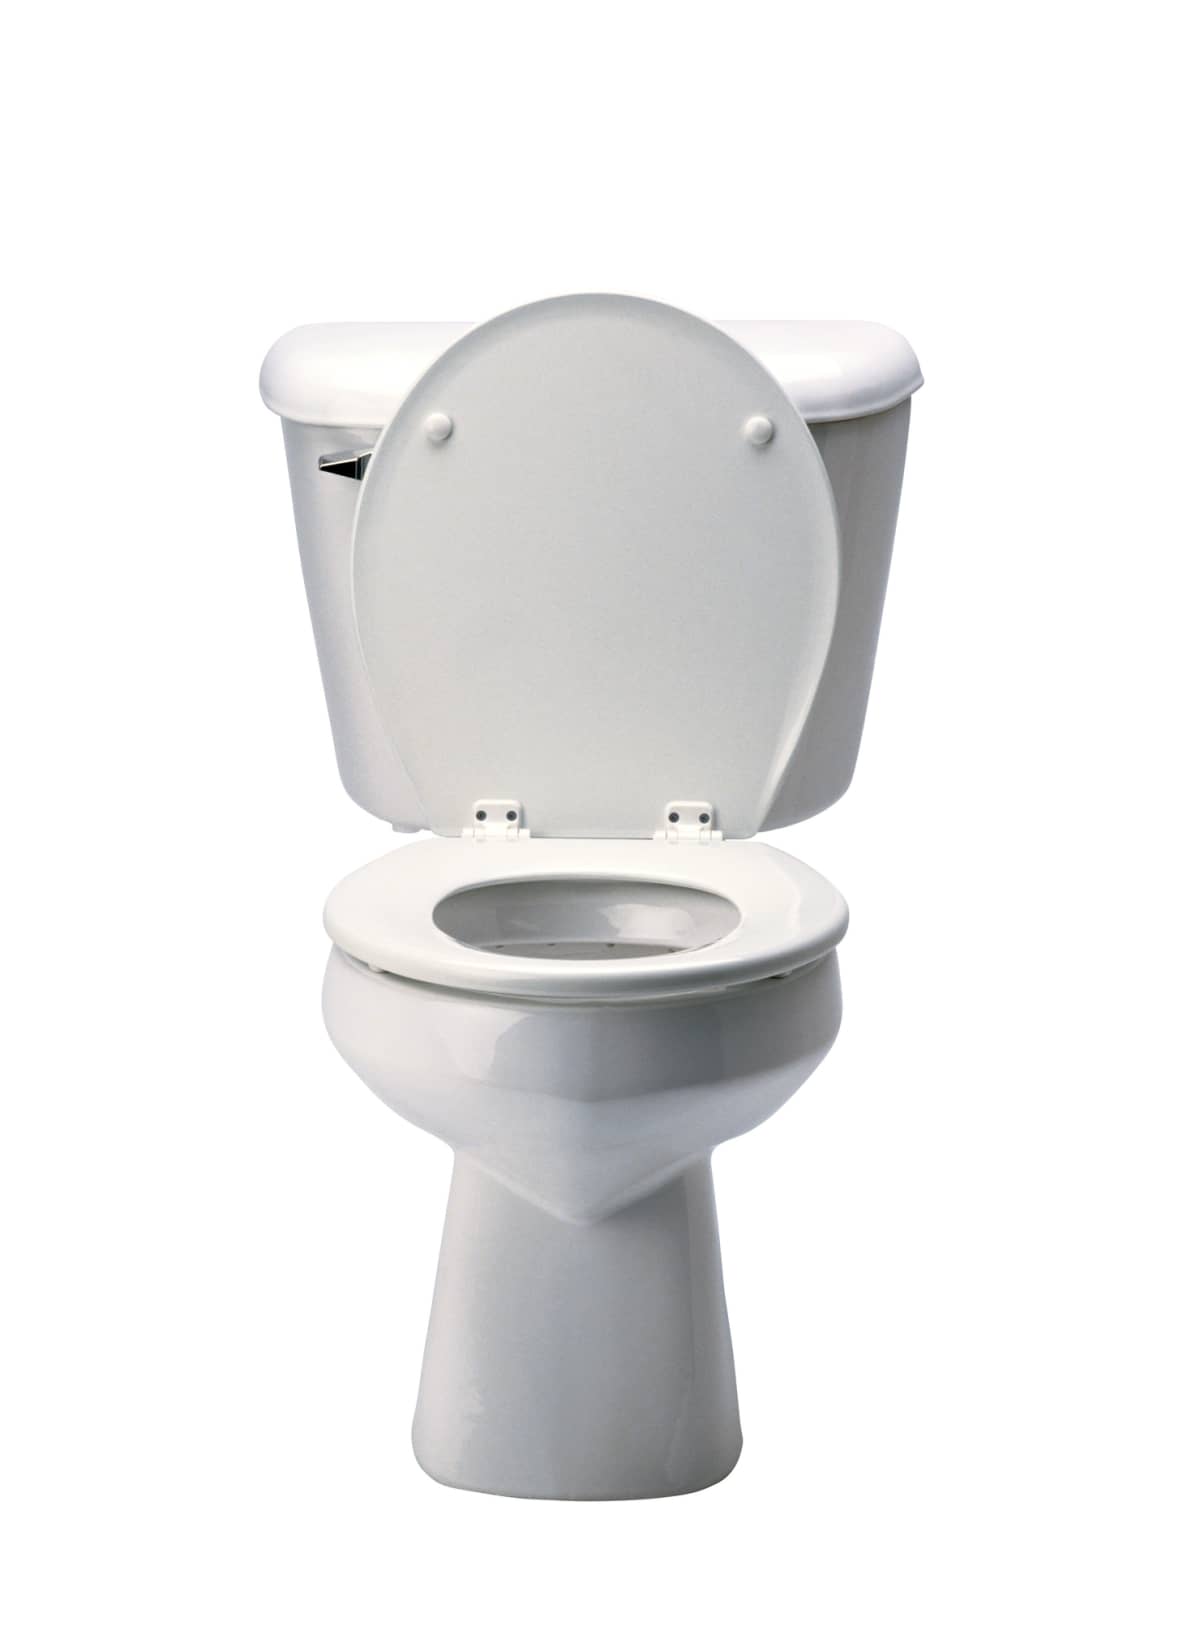 A clean white toilet against a white background.